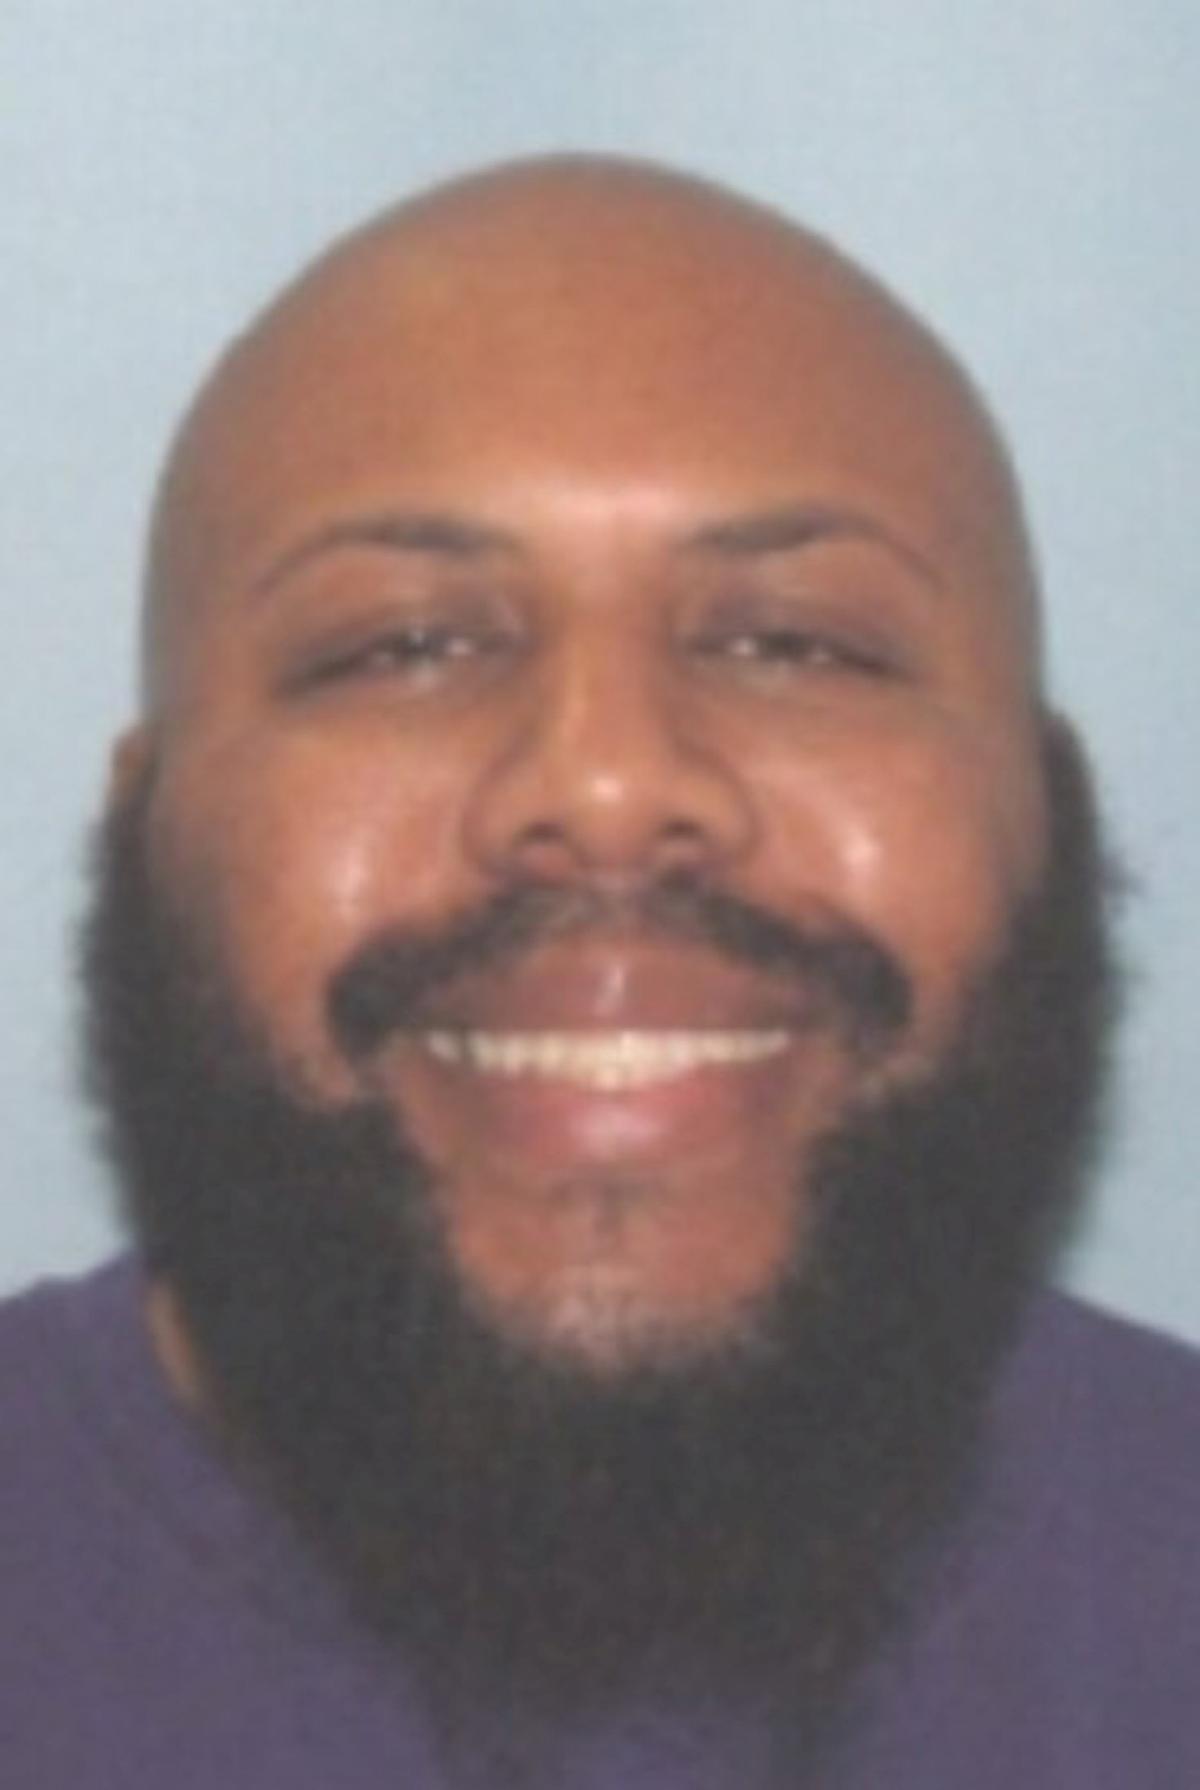 Steve Stephens is seen in an undated handout photo released on April 16, 2017. (Cleveland Police/Handout via REUTERS)